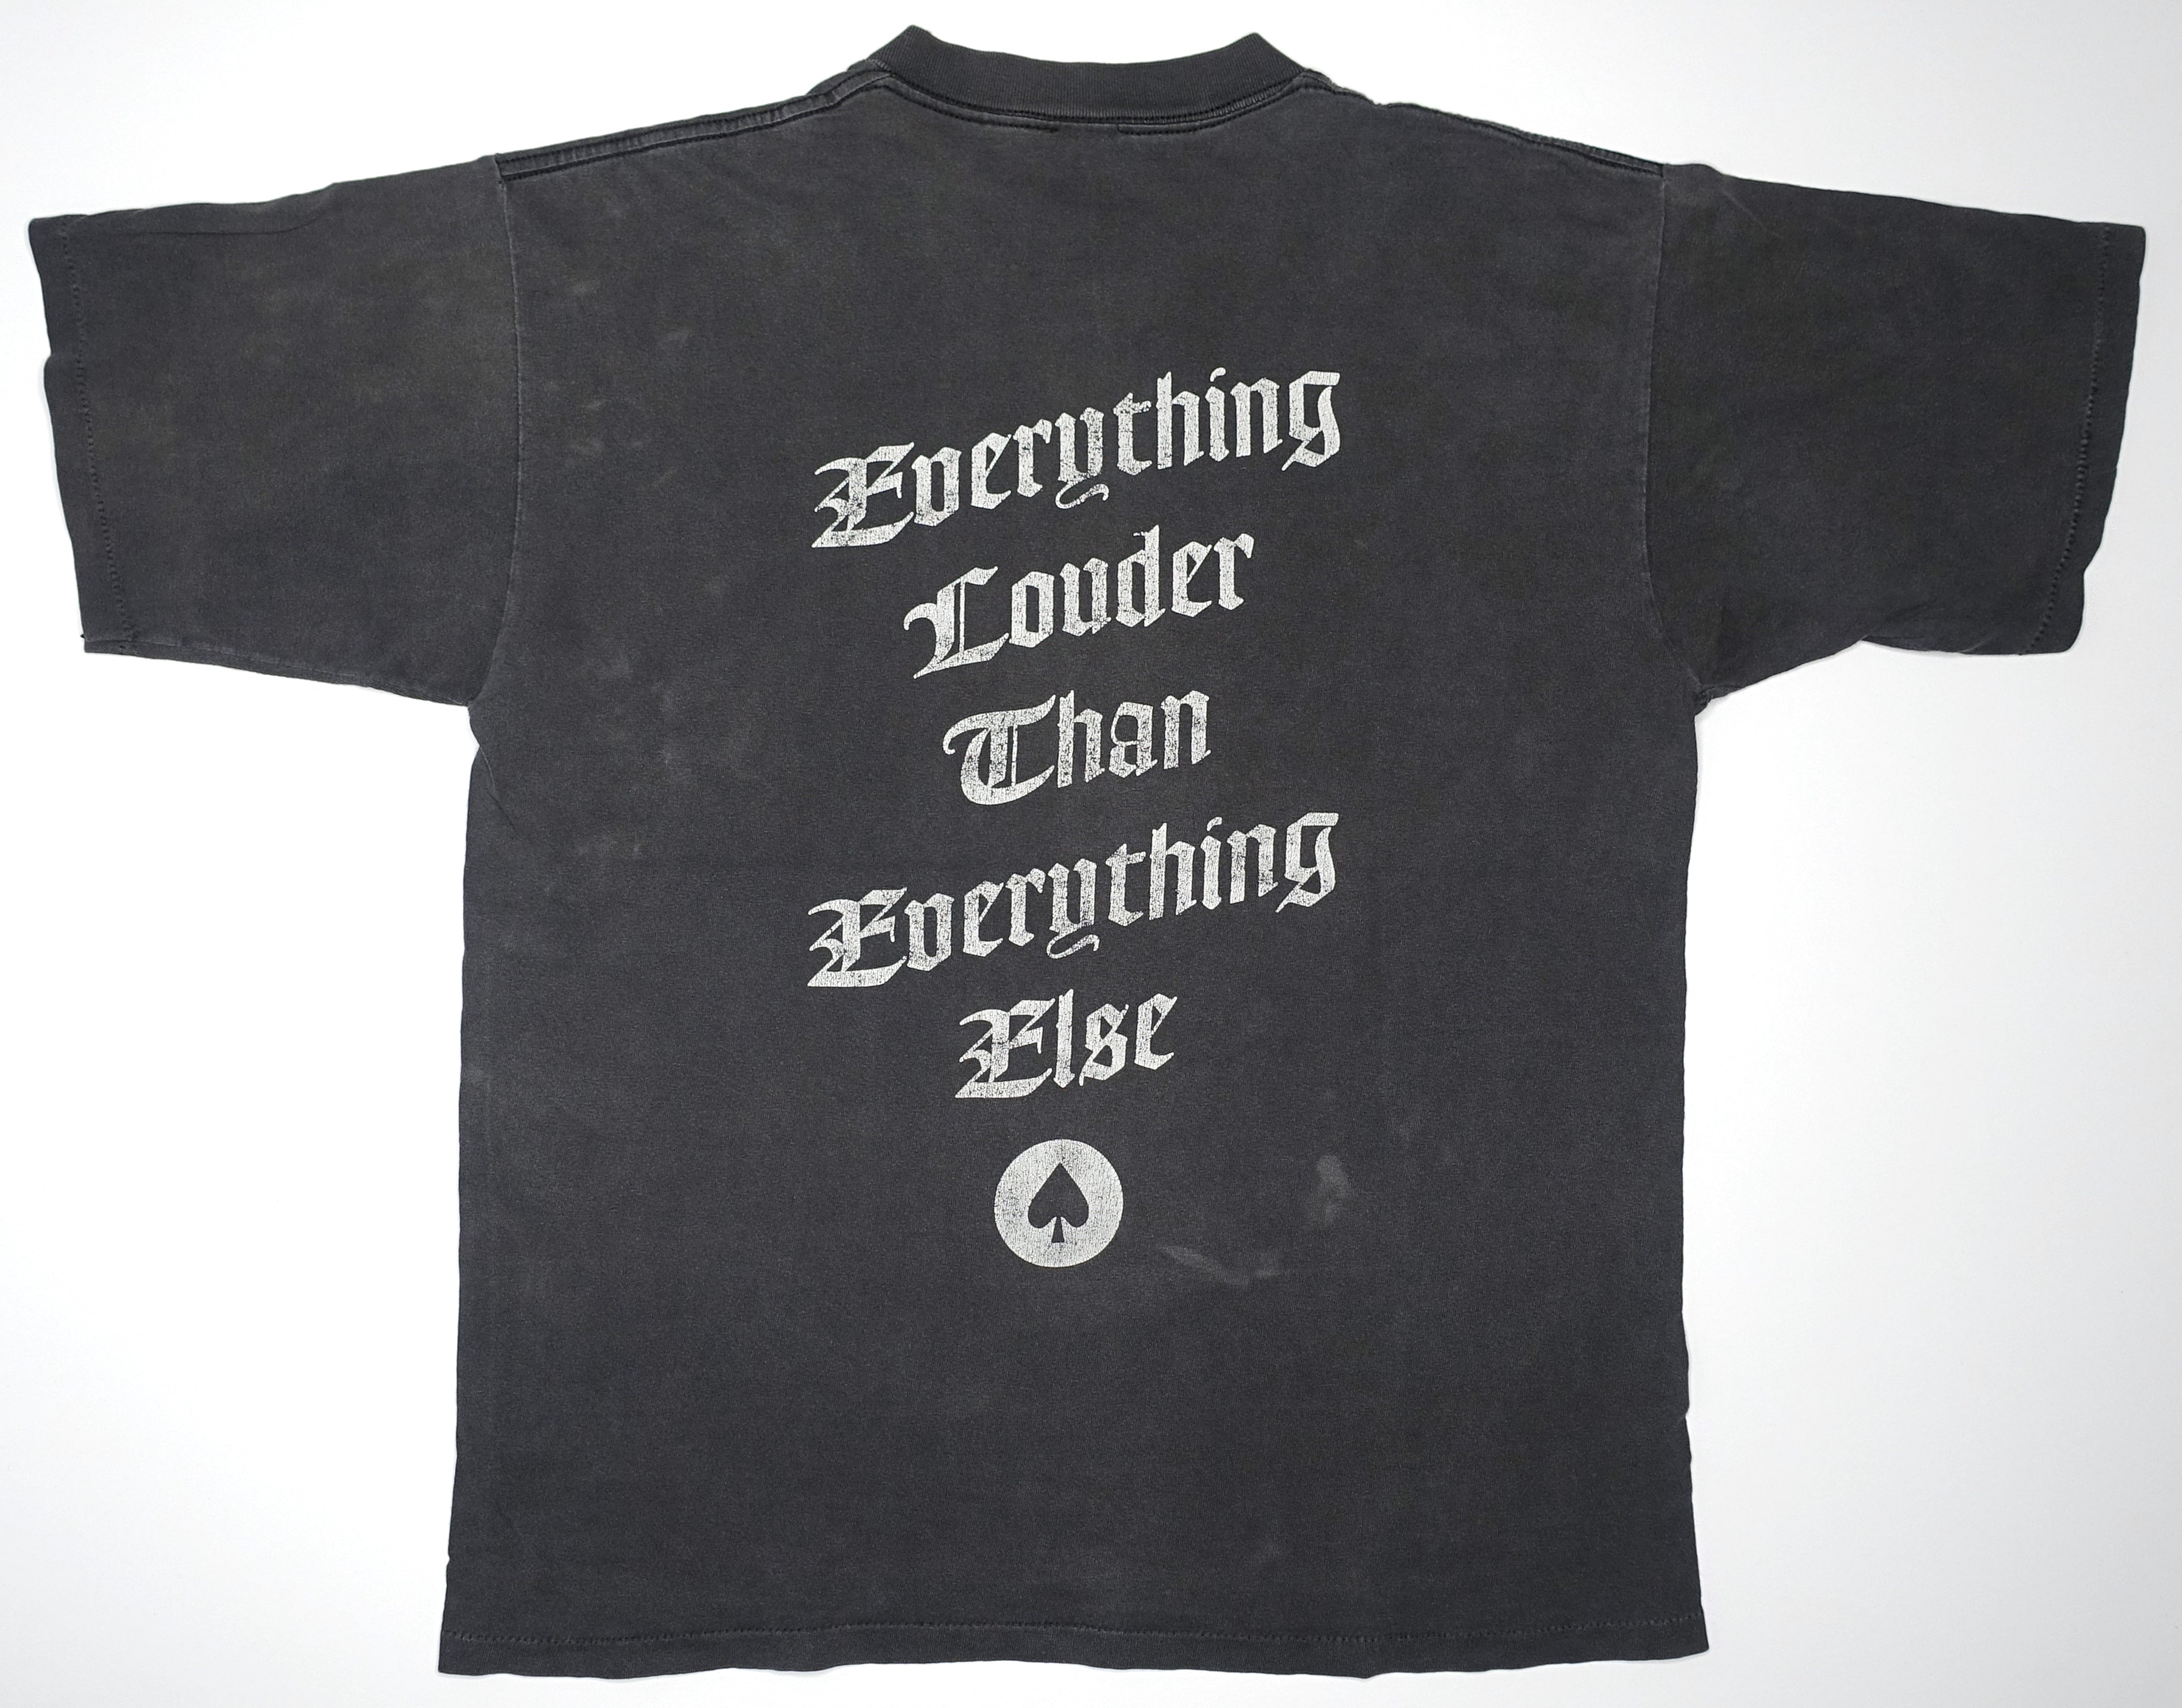 Motörhead - Everything Louder Than Everything Else 90's Tour Shirt Size Large